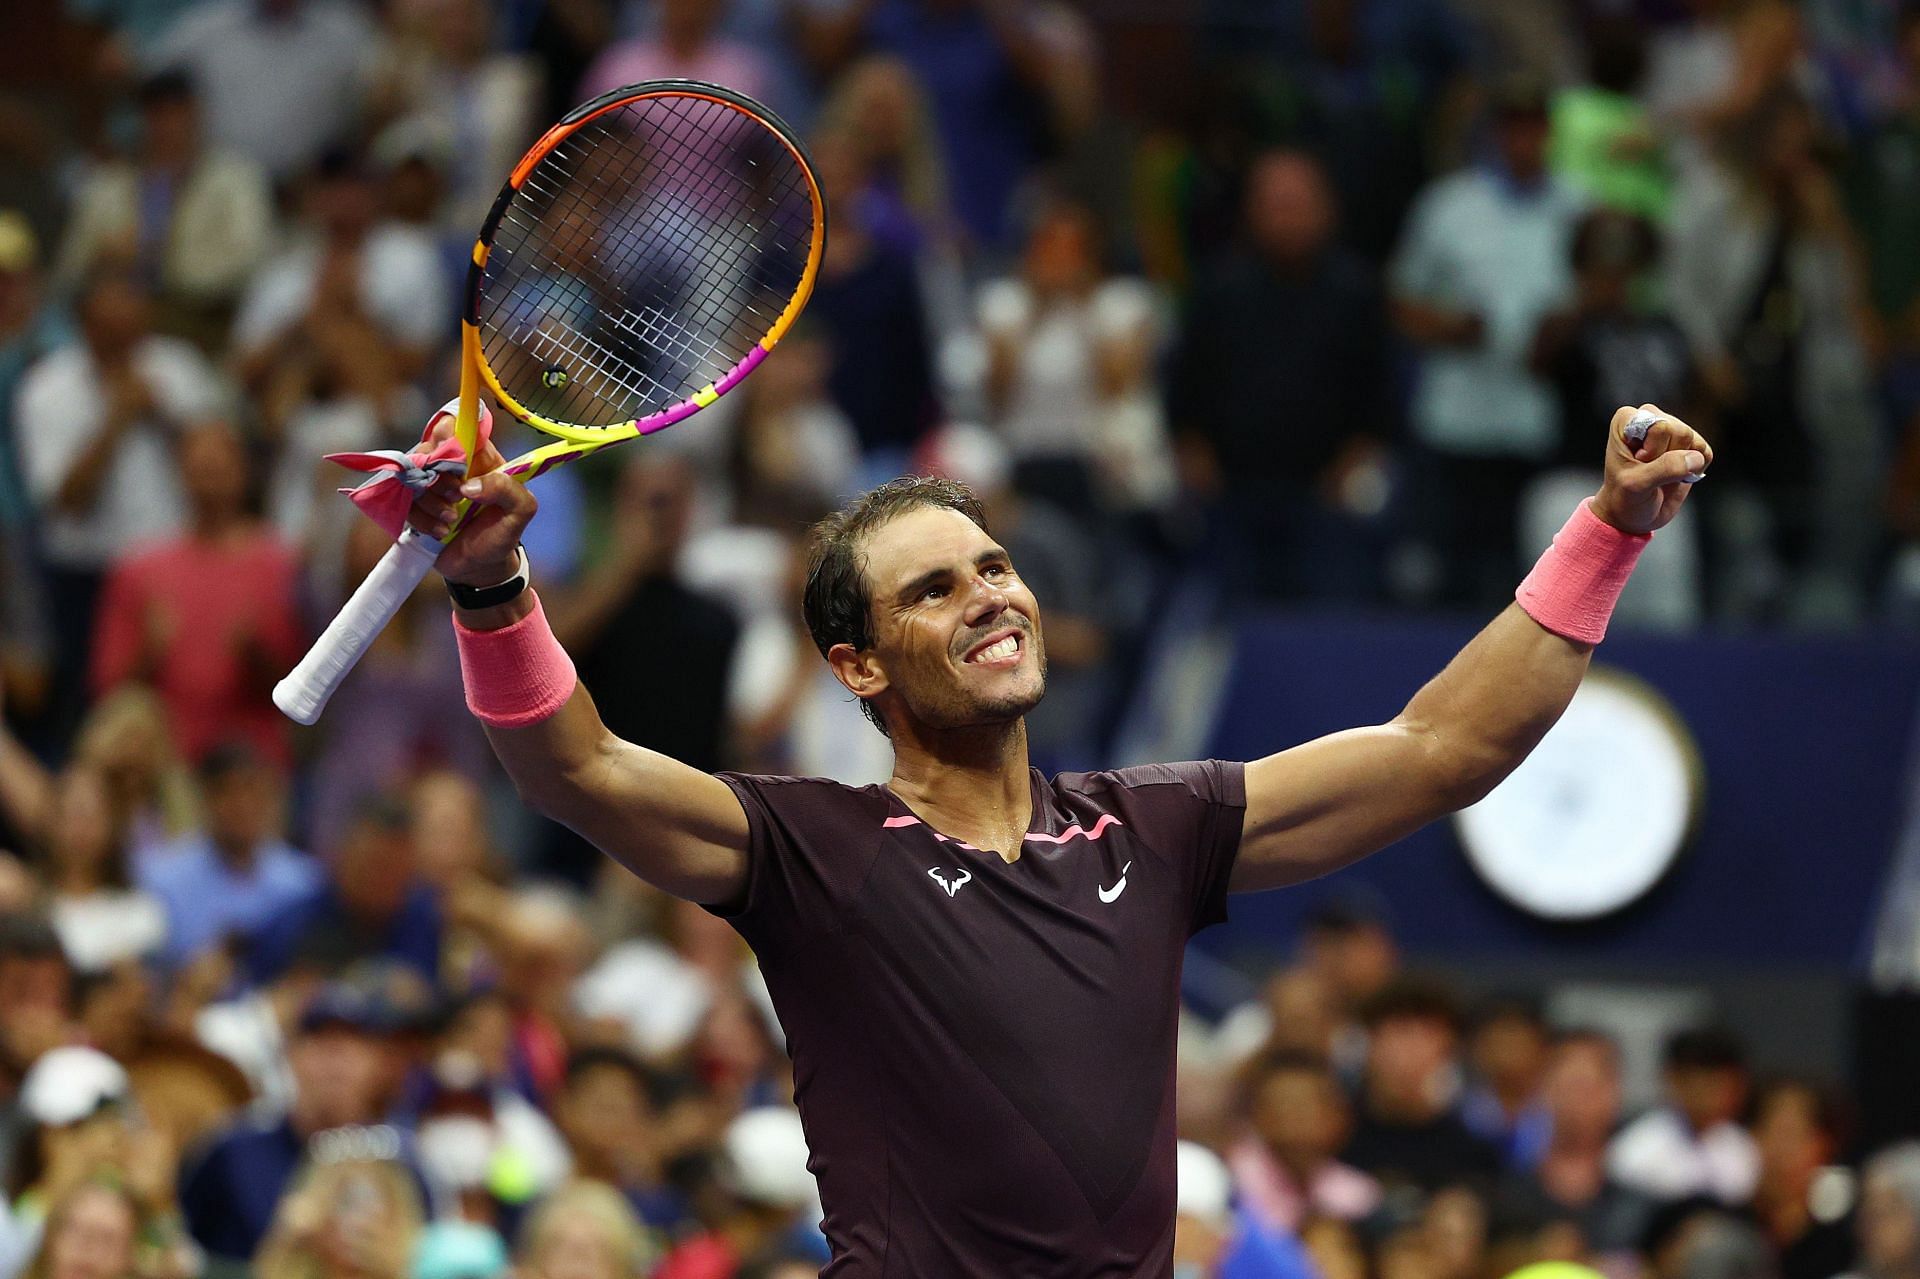 Rafael Nadal vs Frances Tiafoe Where to watch, TV schedule, live streaming details and more US Open 2022